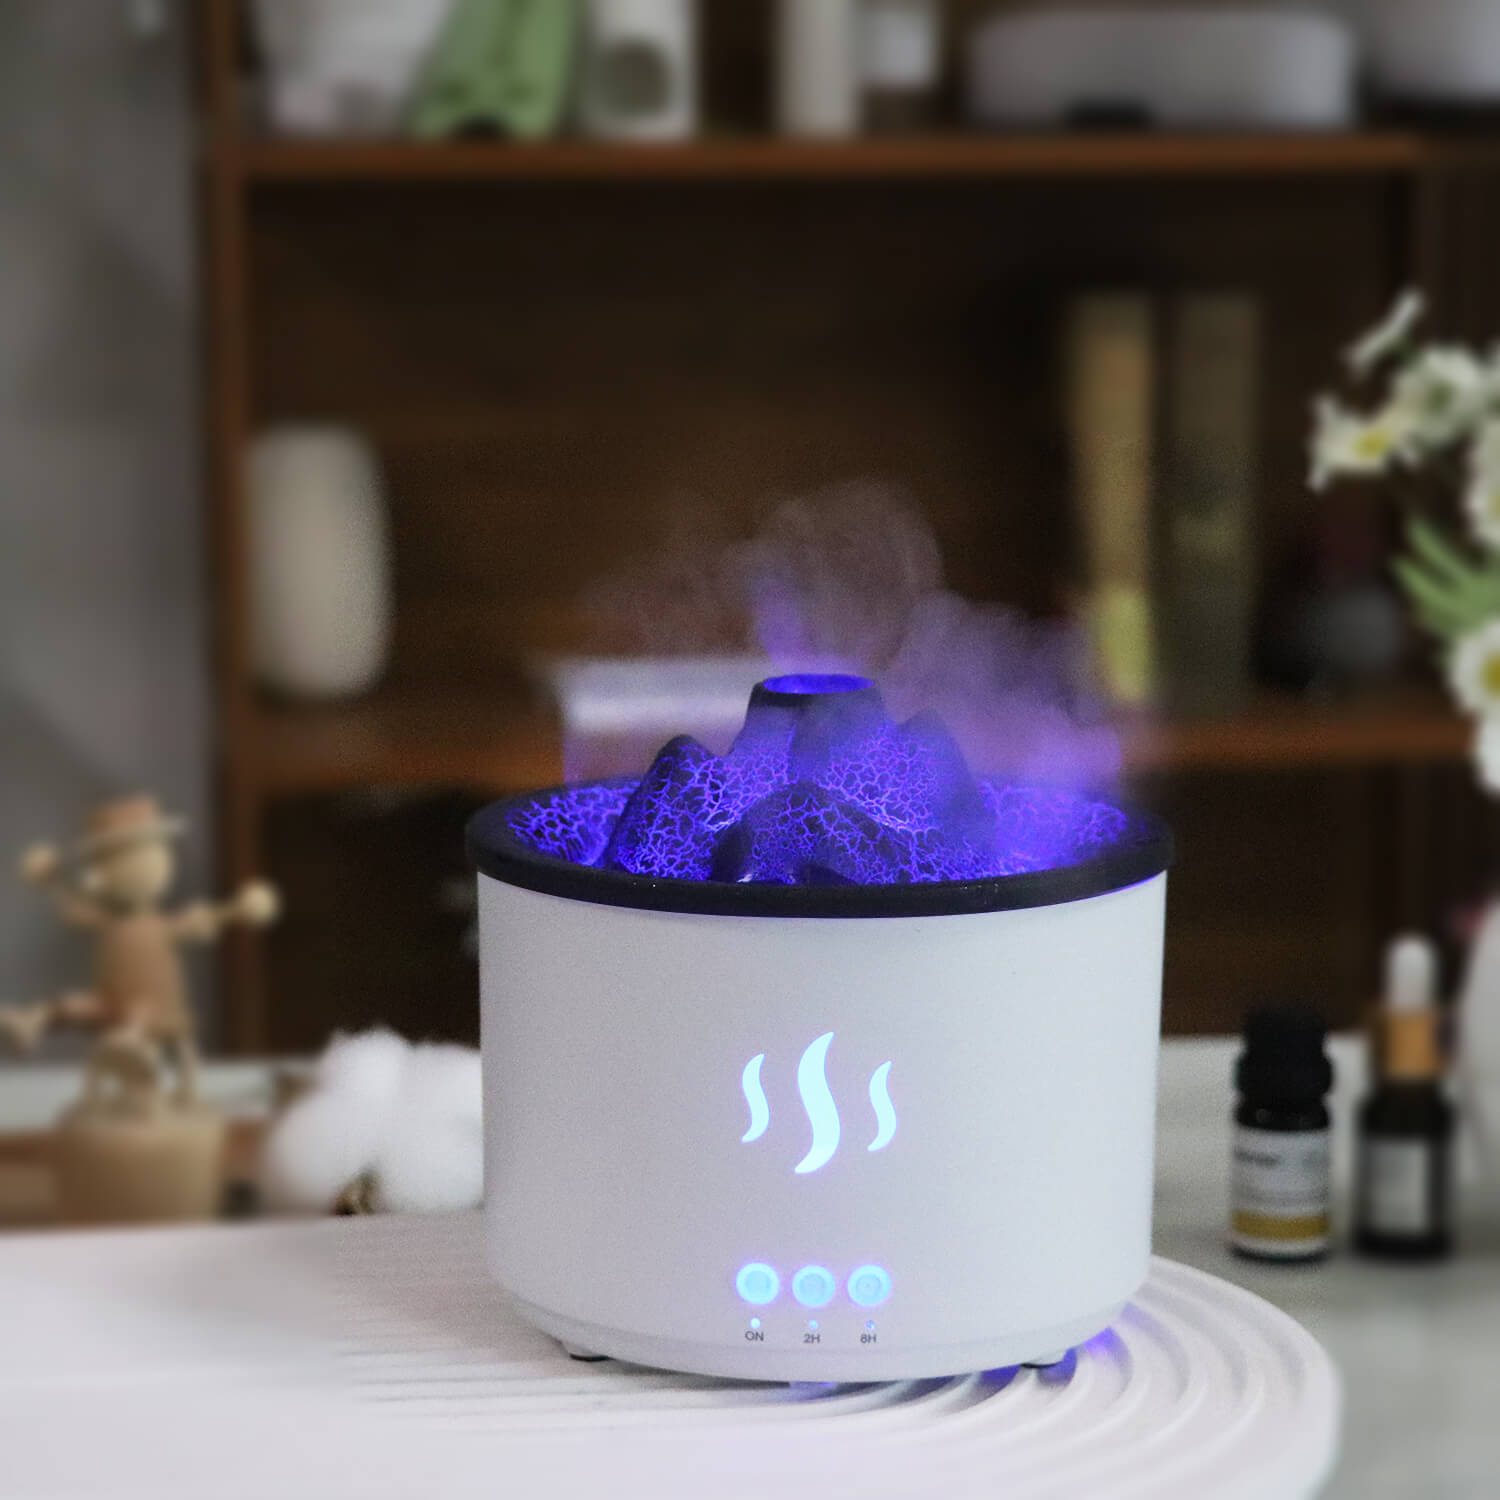 Relax and unwind with the stress-relieving benefits of our Volcano Aroma Humidifier.